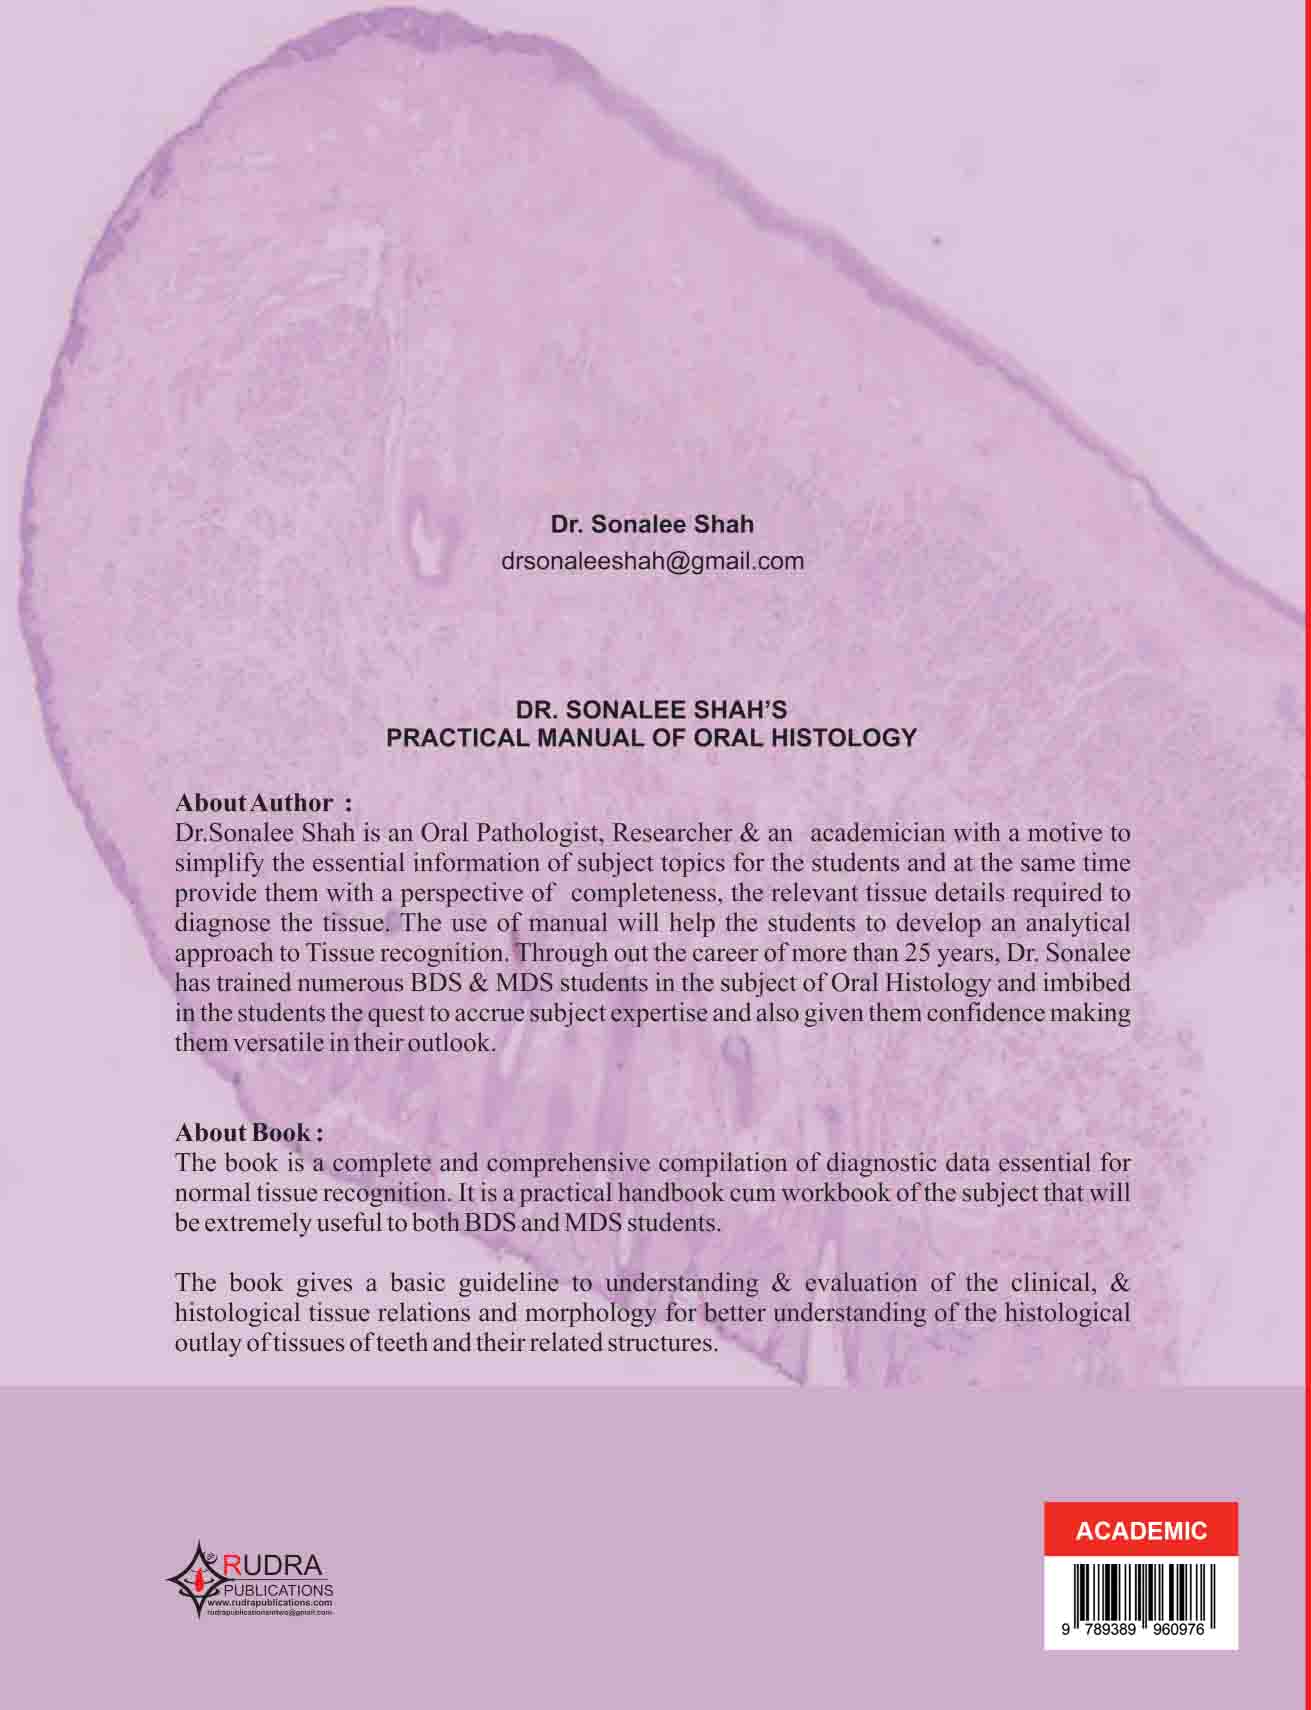 PRACTICAL MANUAL OF ORAL HISTOLOGY